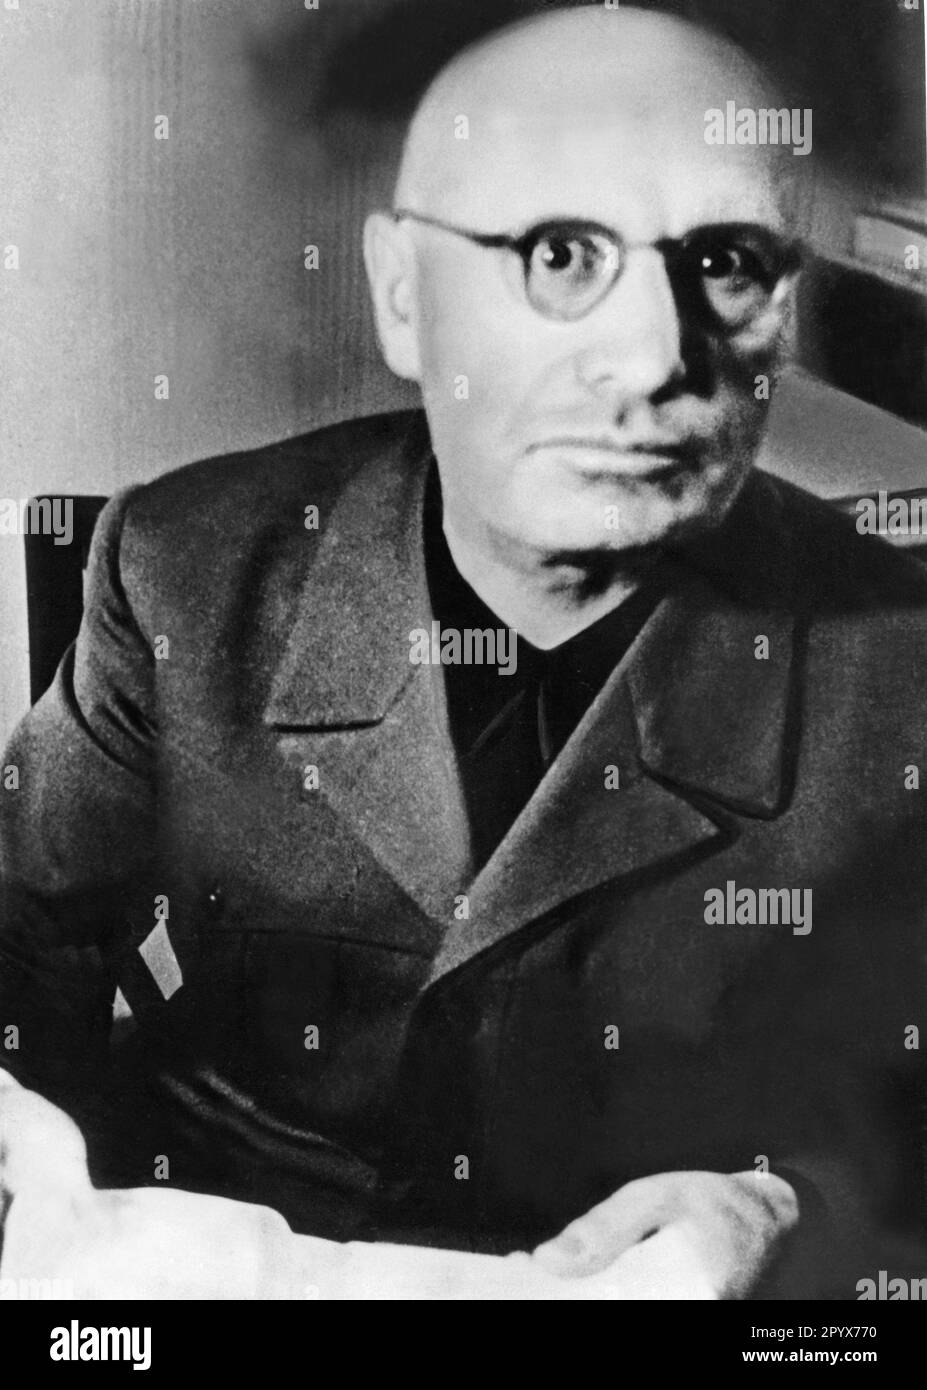 Benito Mussolini shortly before his death in the spring of 1945. His physical and mental deterioration is clearly visible. [automated translation] Stock Photo